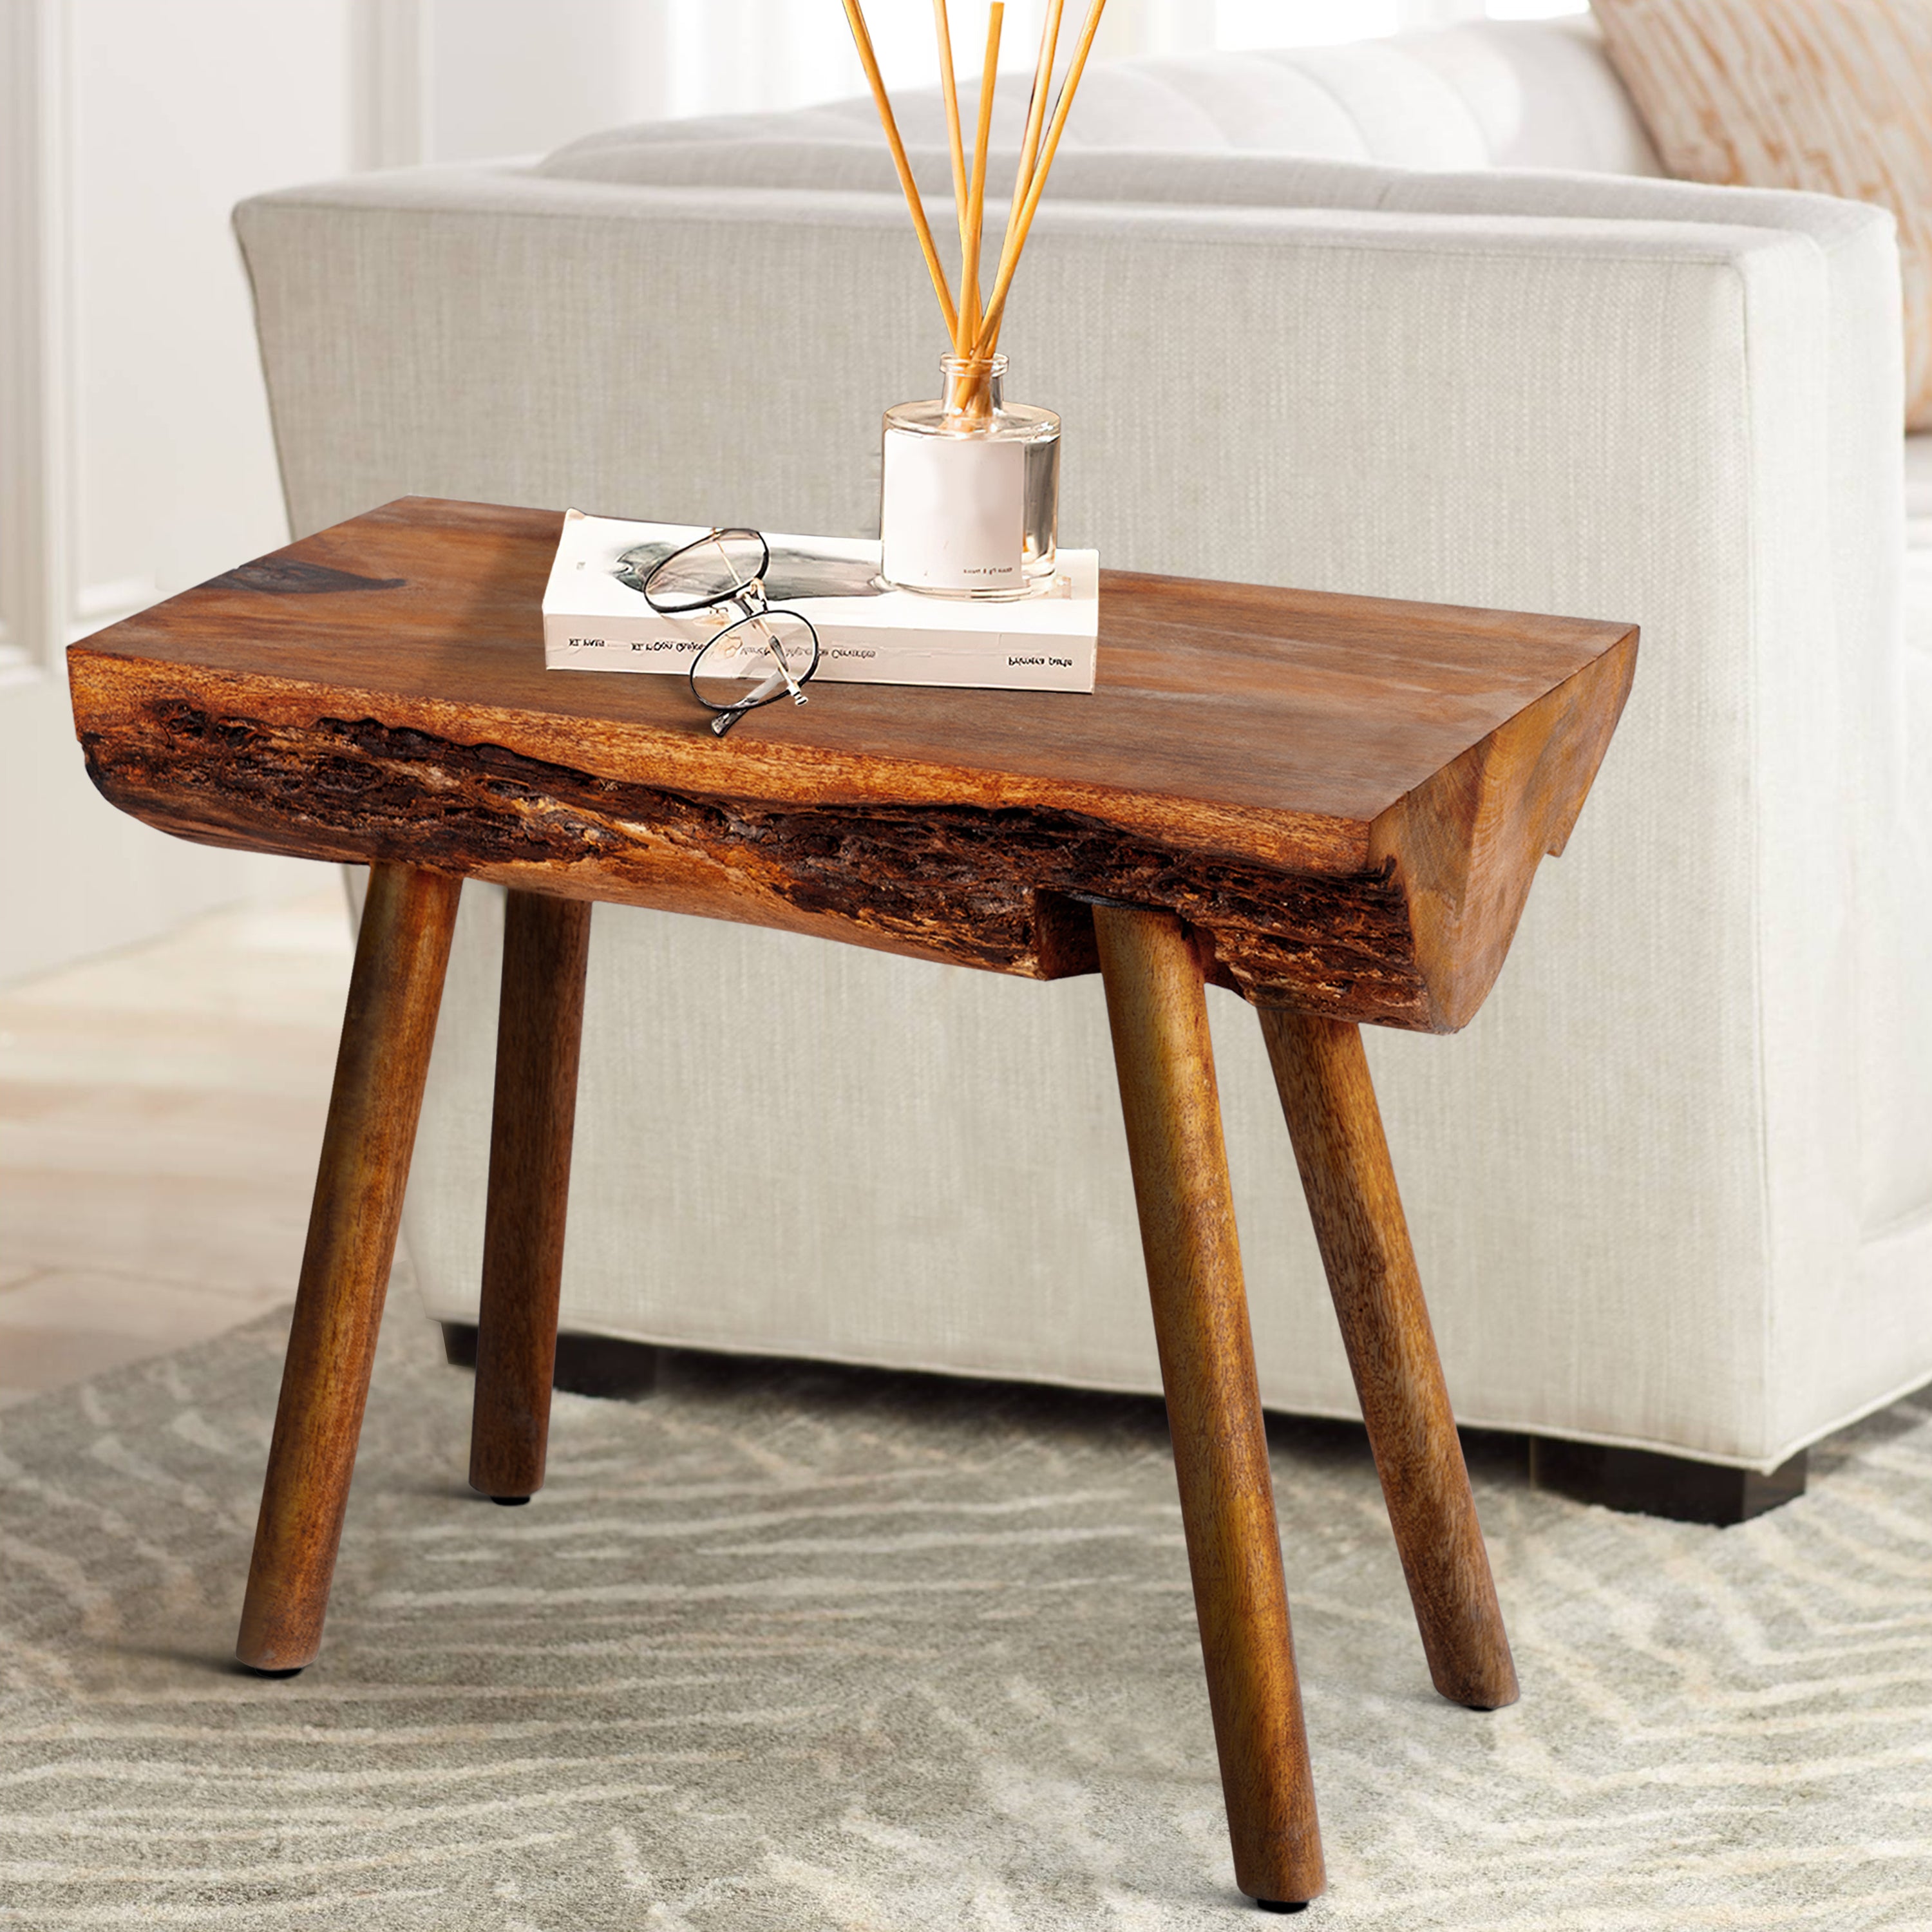 MAICOSY Small Side Tables Bedside End Tables Live Edge Rectangular Coffee Table